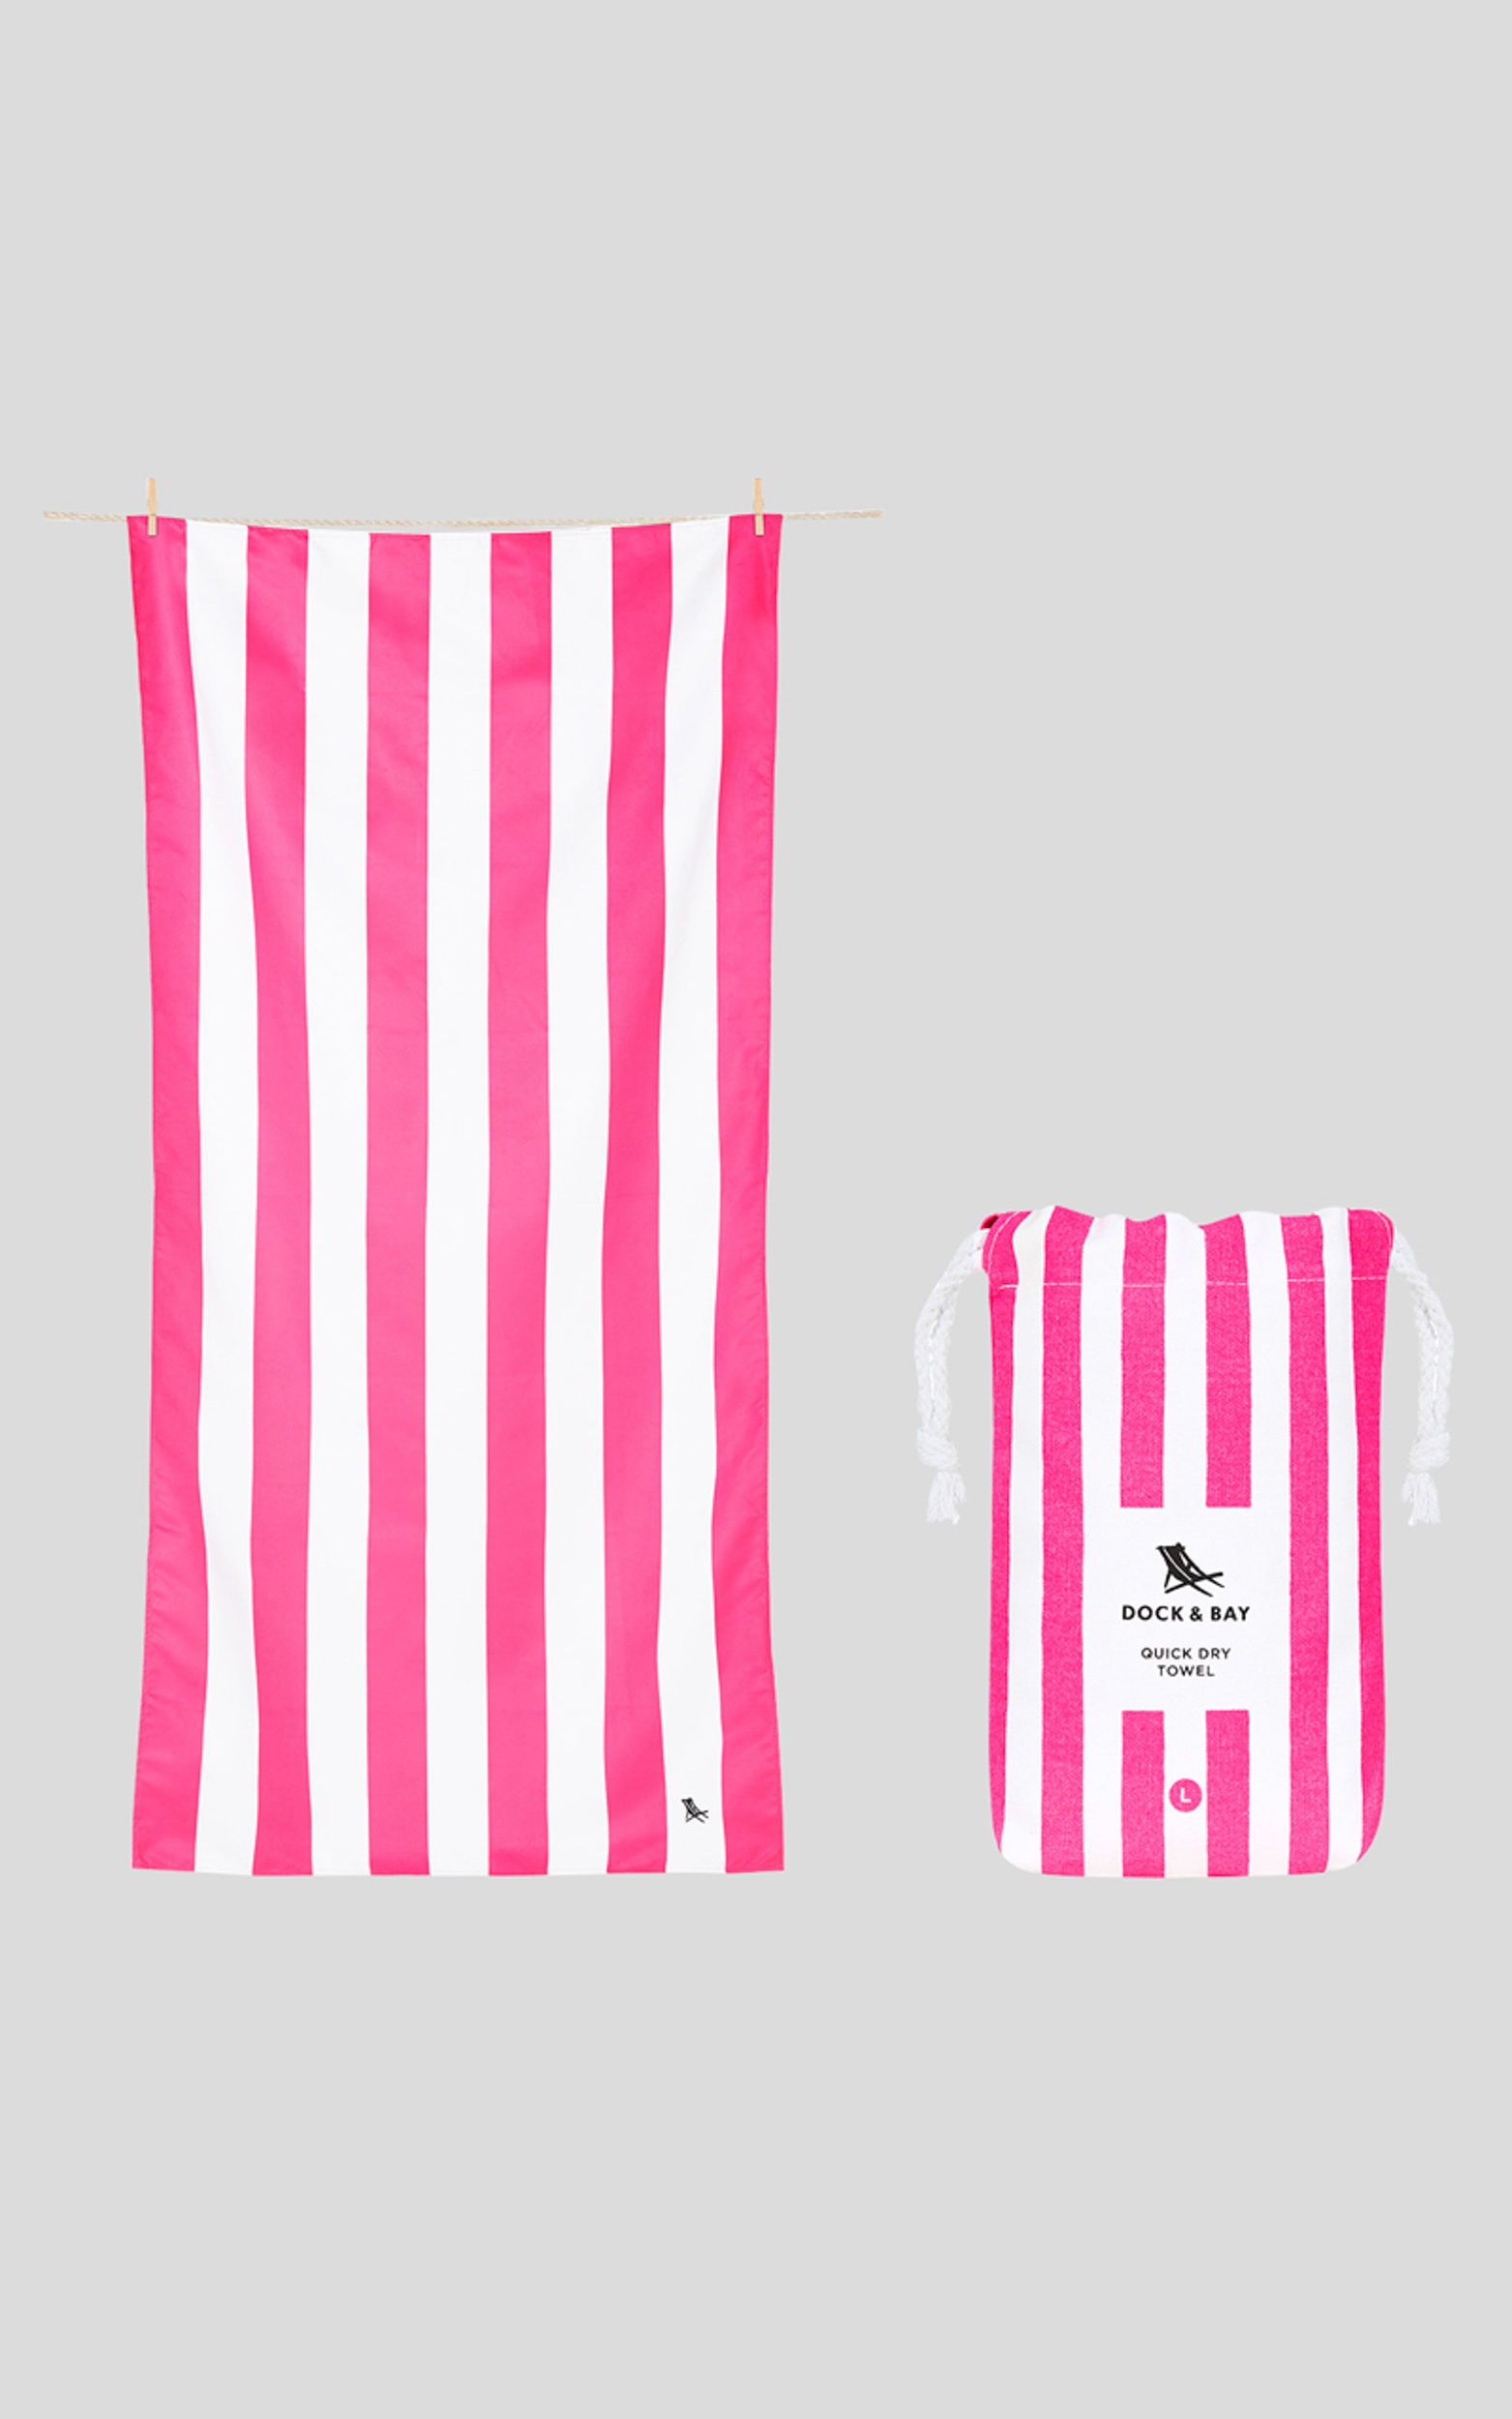 Dock & Bay - Beach Towel Cabana Collection (XL) in Malibu Pink - NoSize, PNK1, hi-res image number null